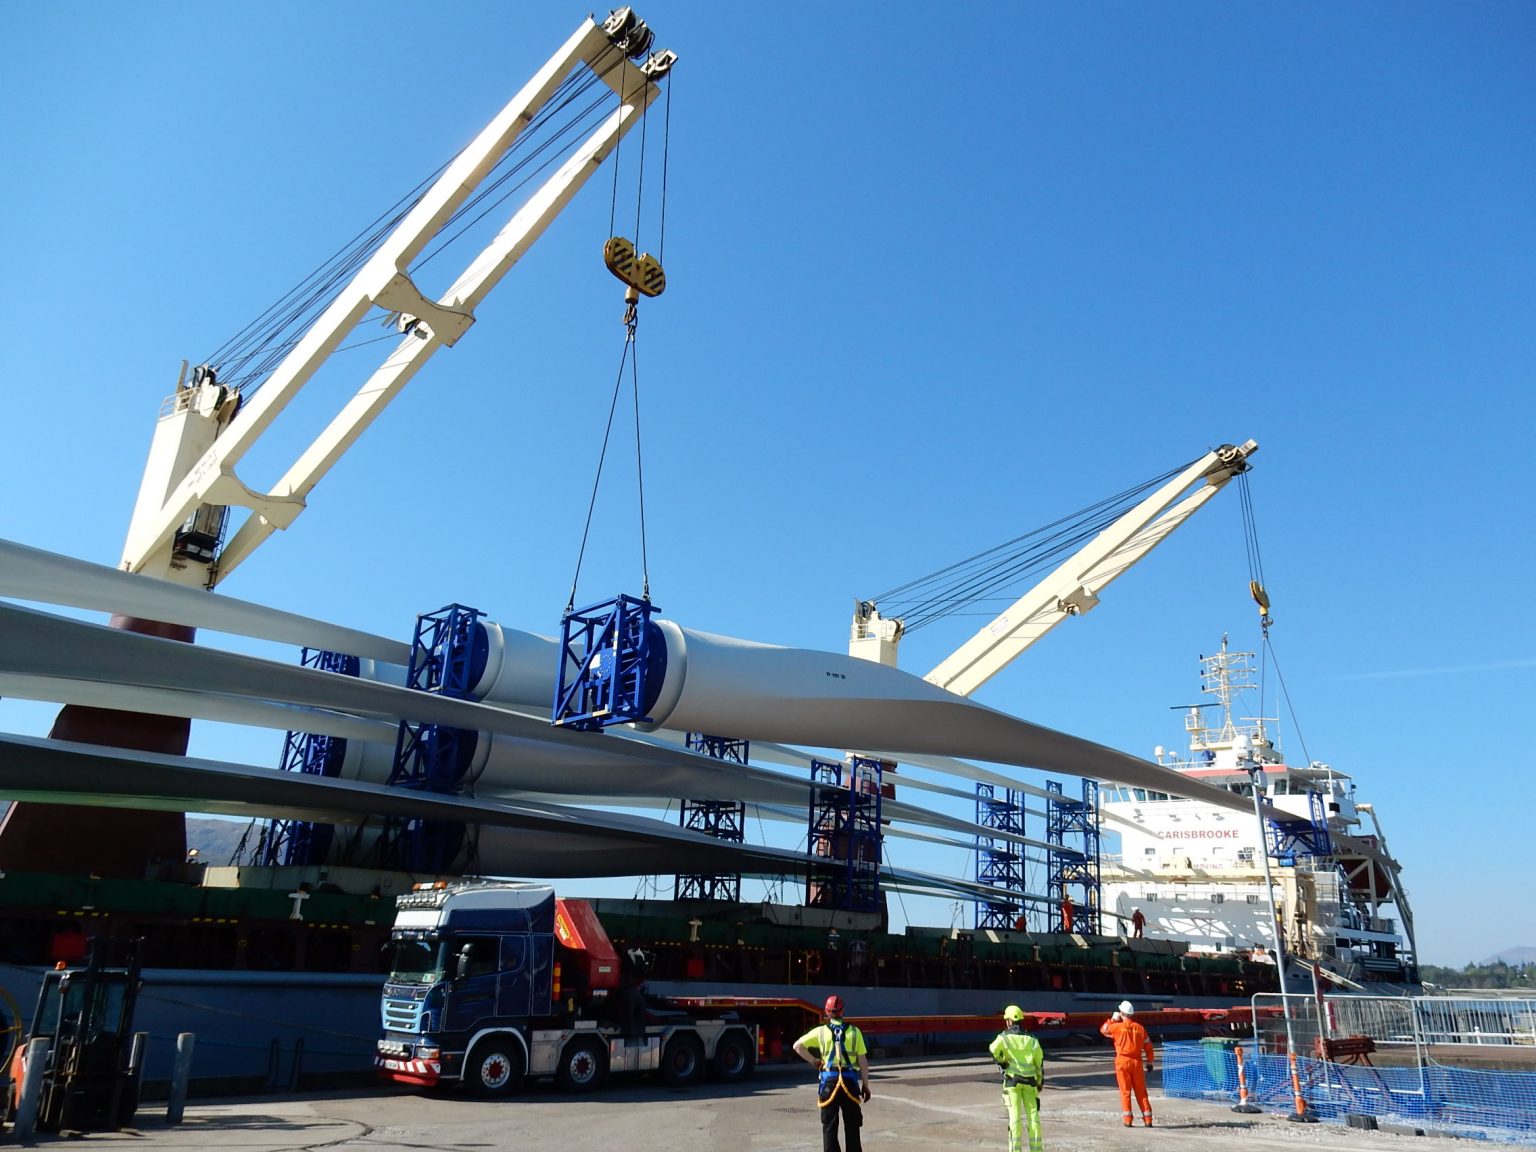 Wind turbine blades being loaded onto a vessel from a dock